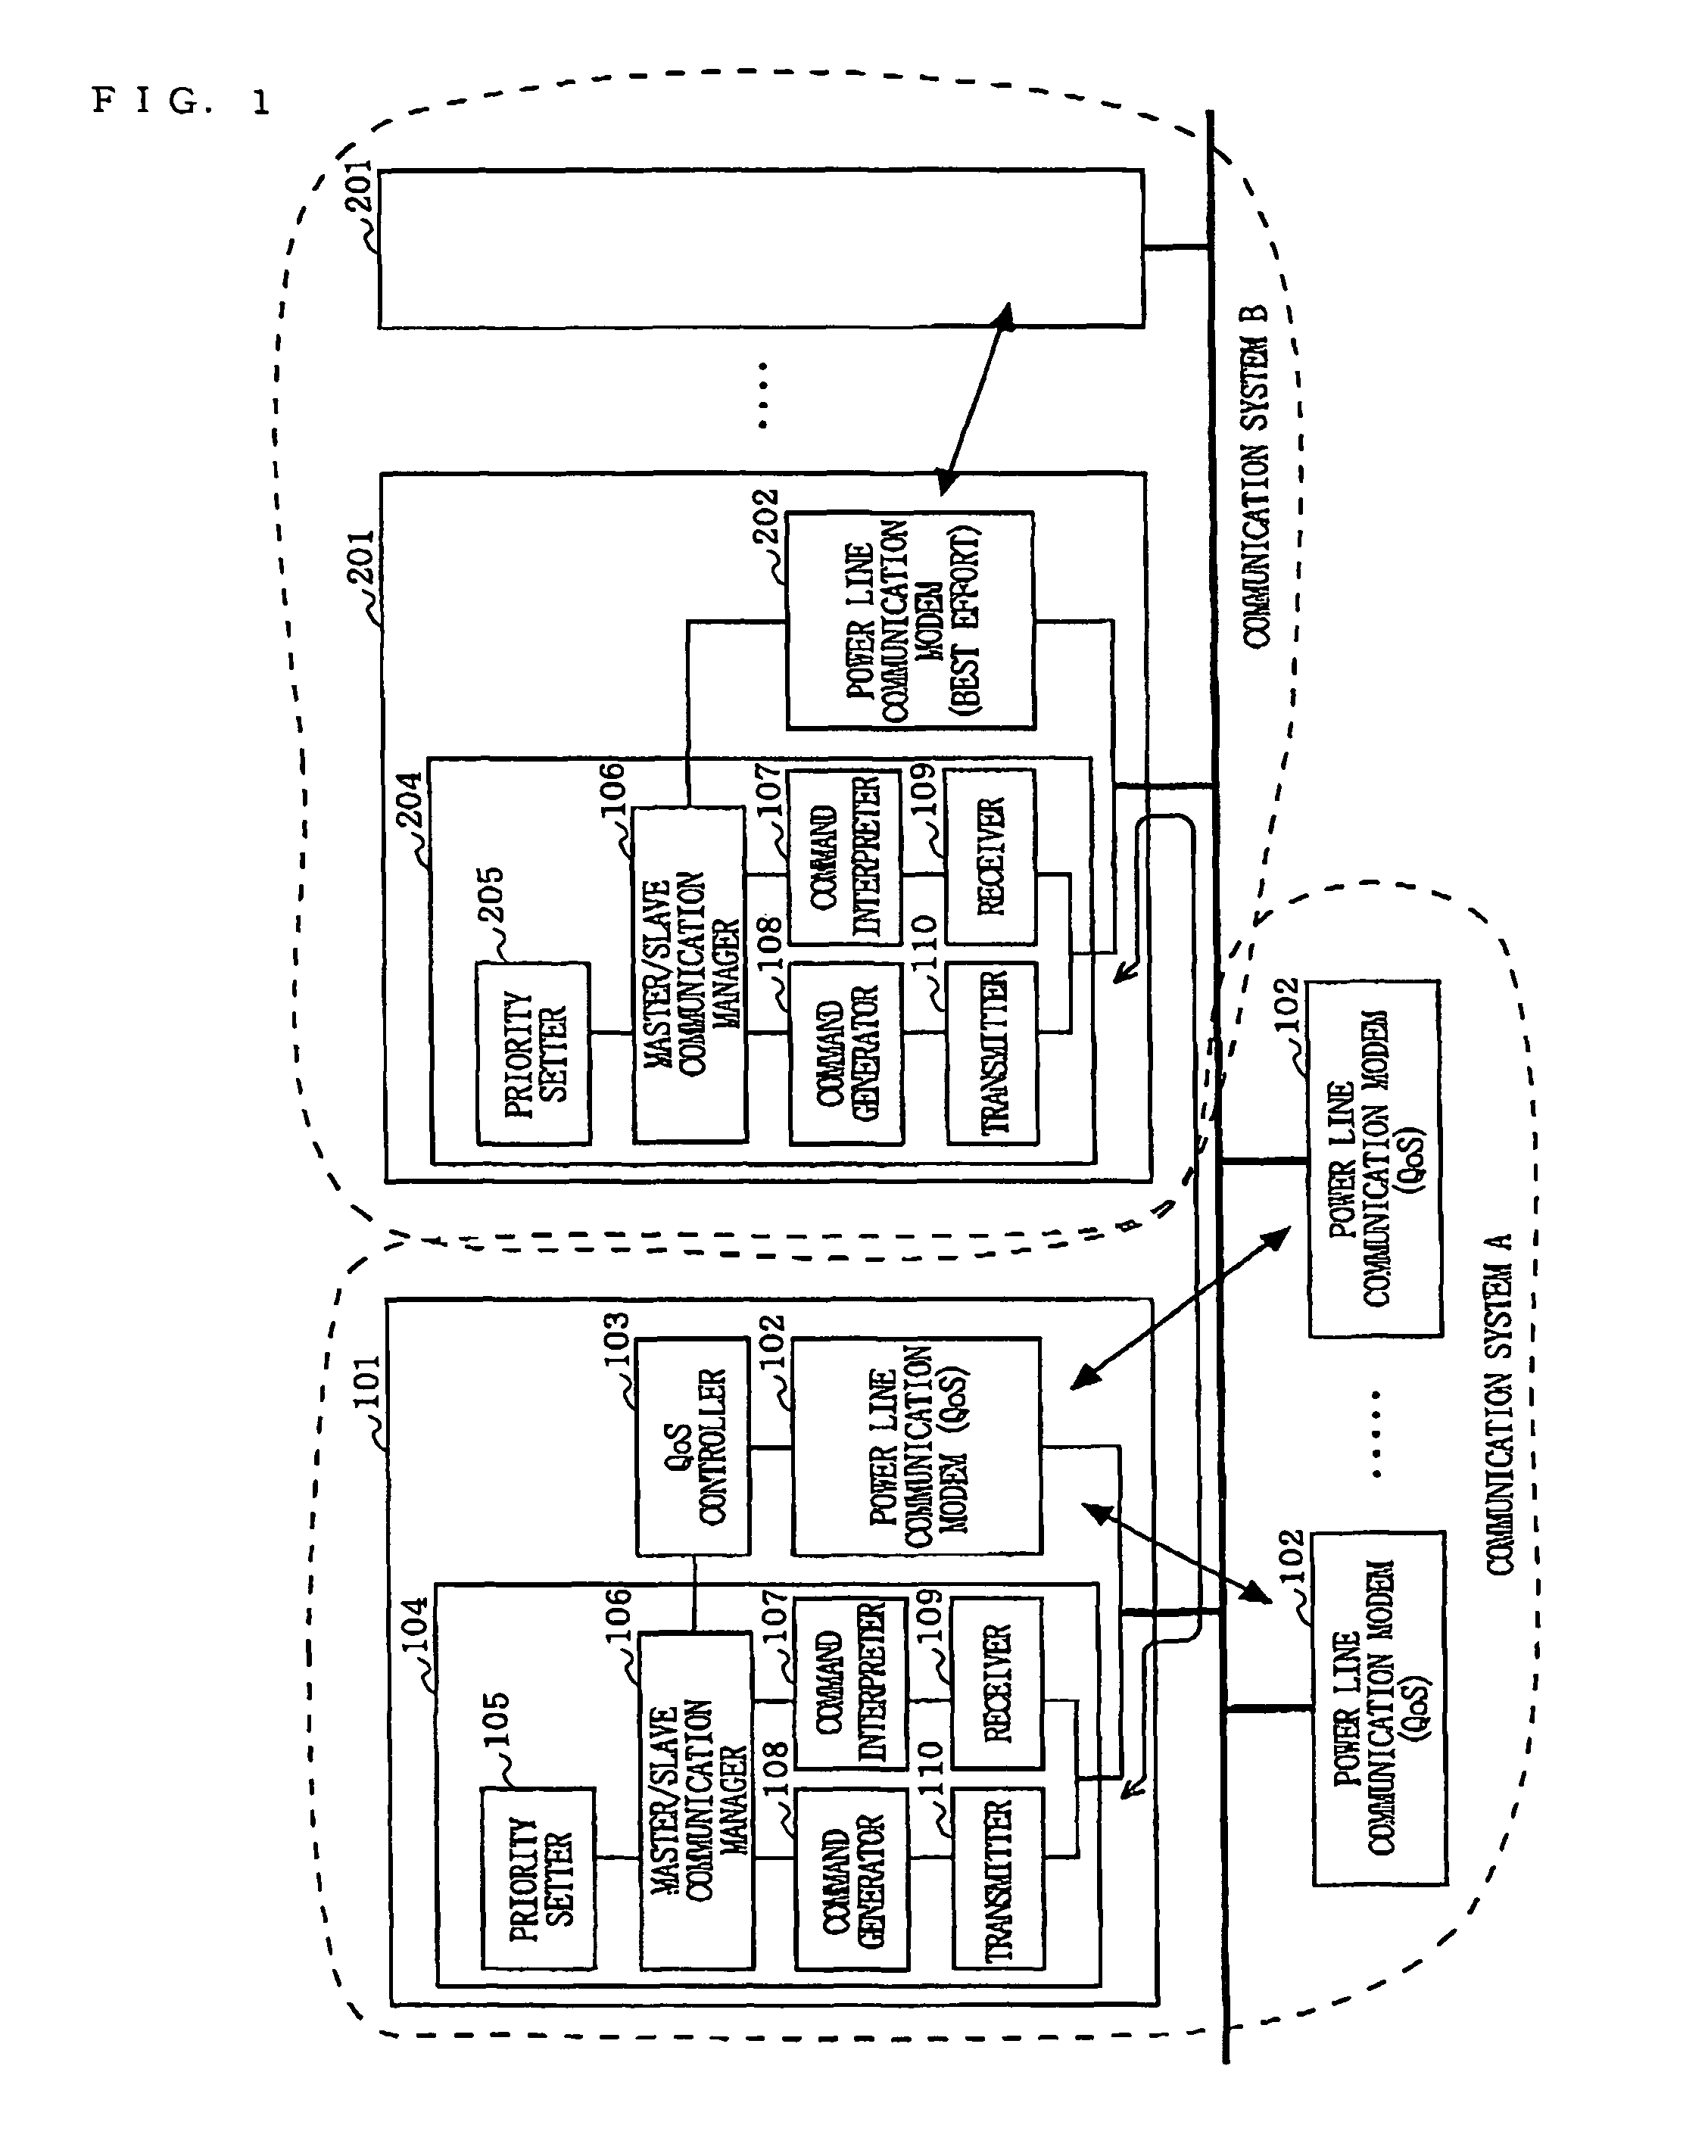 Communication apparatus enabling temporal coexistence of systems